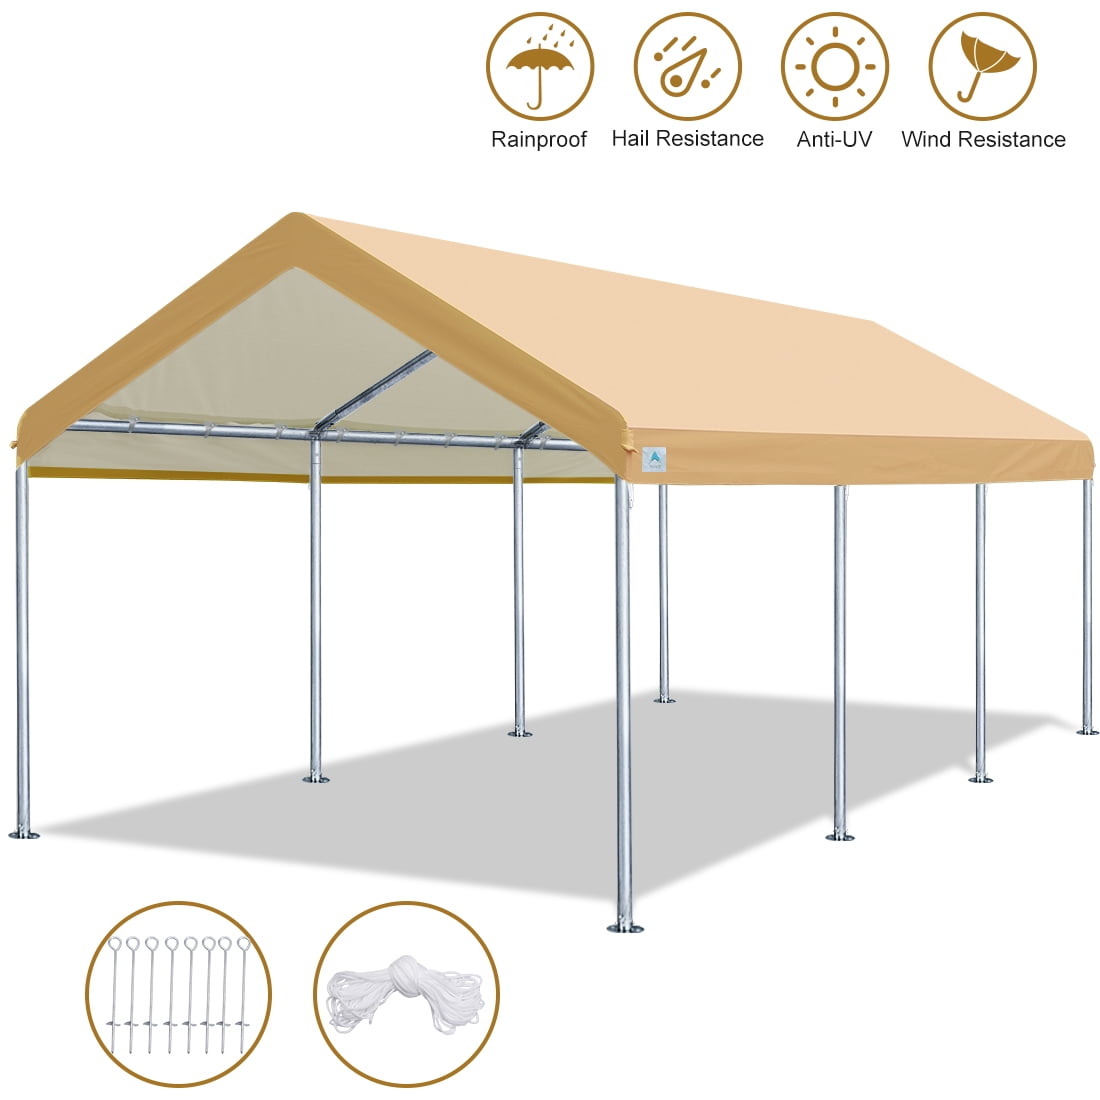 Advance Outdoor Adjustable 10x20 Ft Heavy Duty Carport Car Canopy Garage Boat Shelter Party Tent Adjustable Height From 6 0ft To 7 5ft Beige Walmart Com Walmart Com